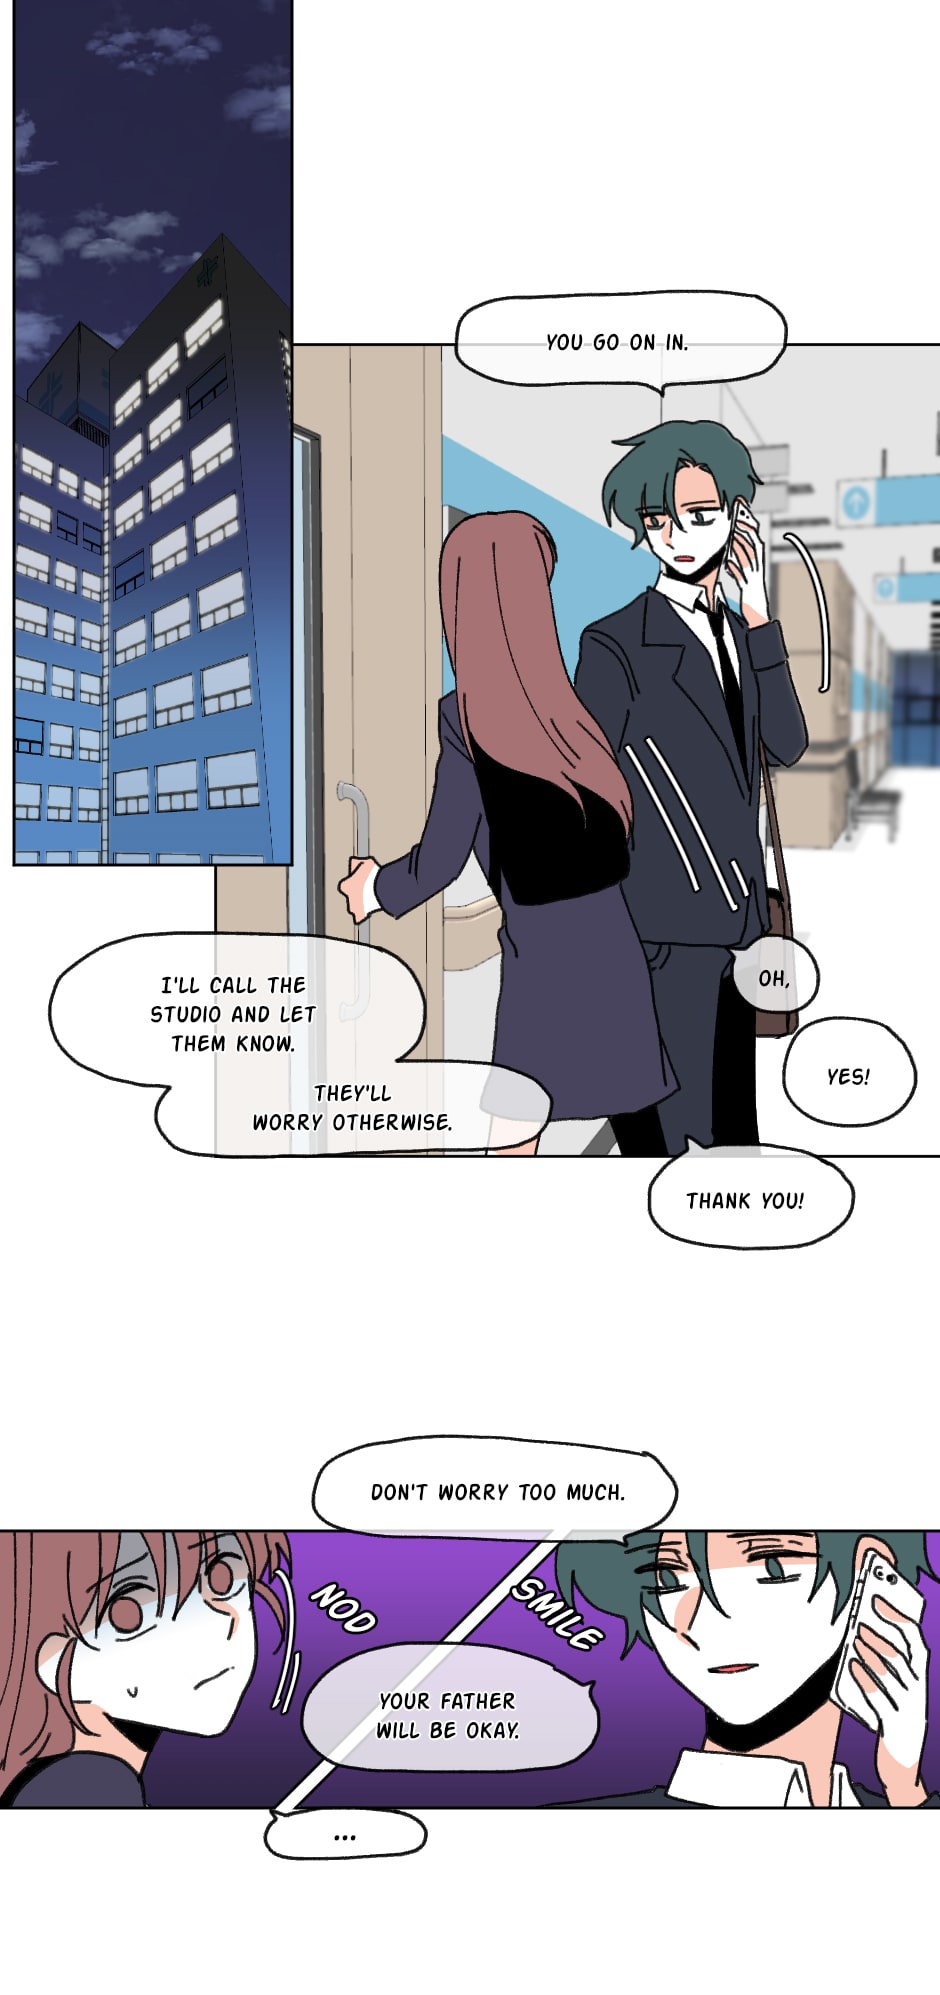 Yes, My Boss! - Page 1